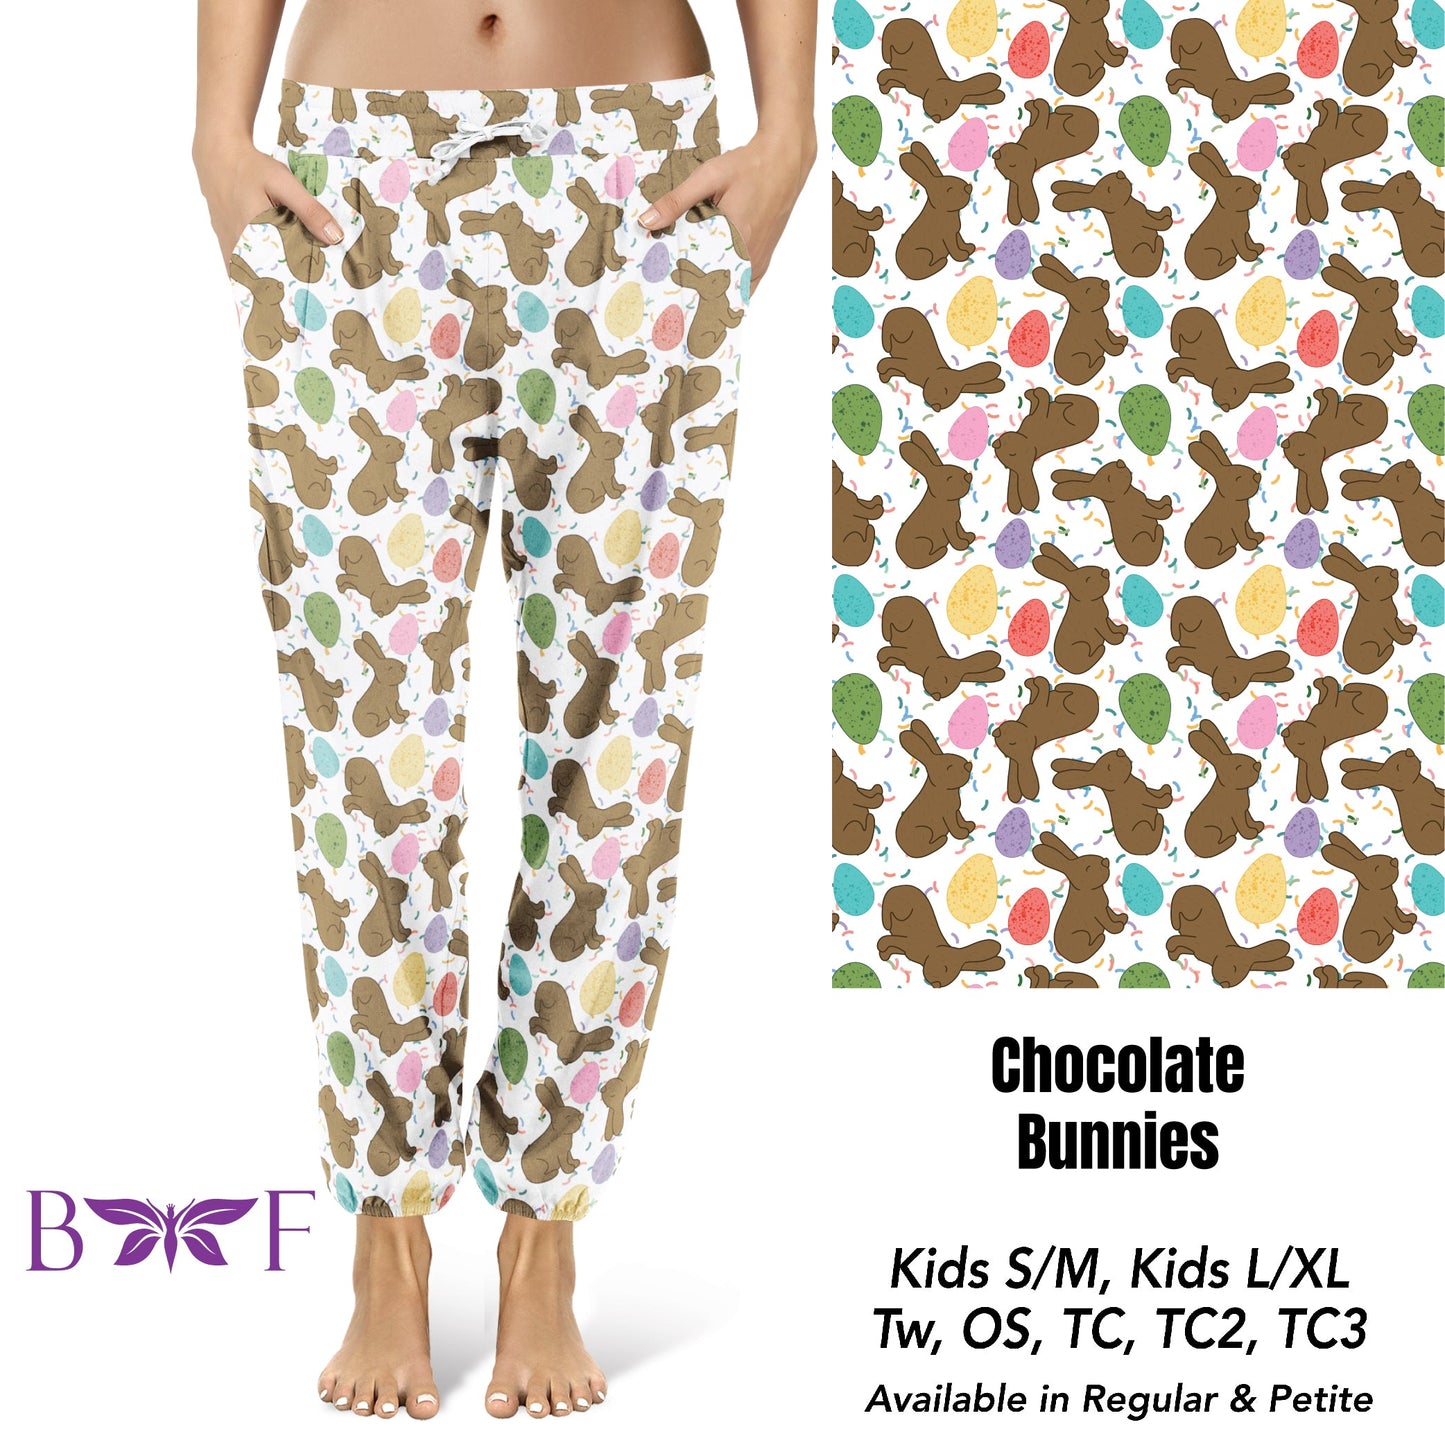 Chocolate Bunny kids leggings with pockets